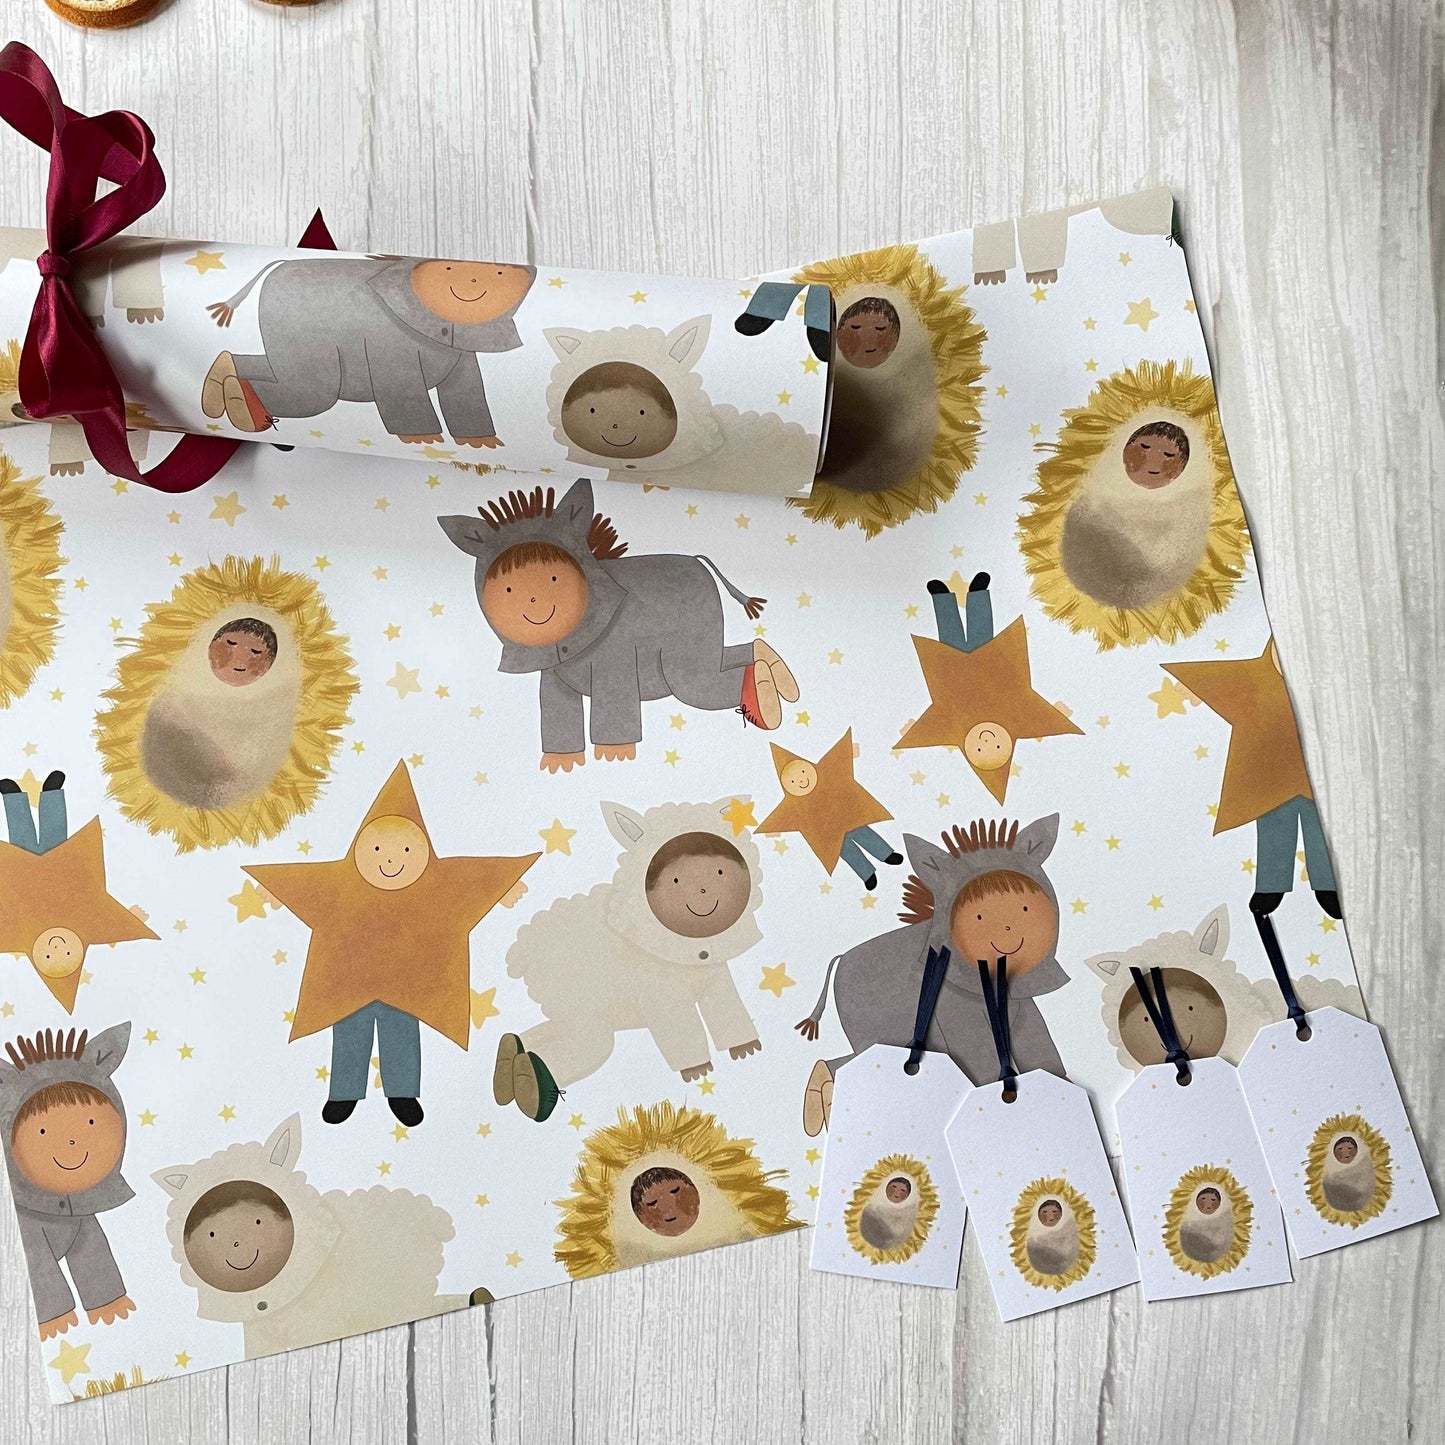 Christian Christmas nativity wrapping paper And Hope Designs Wrapping Paper